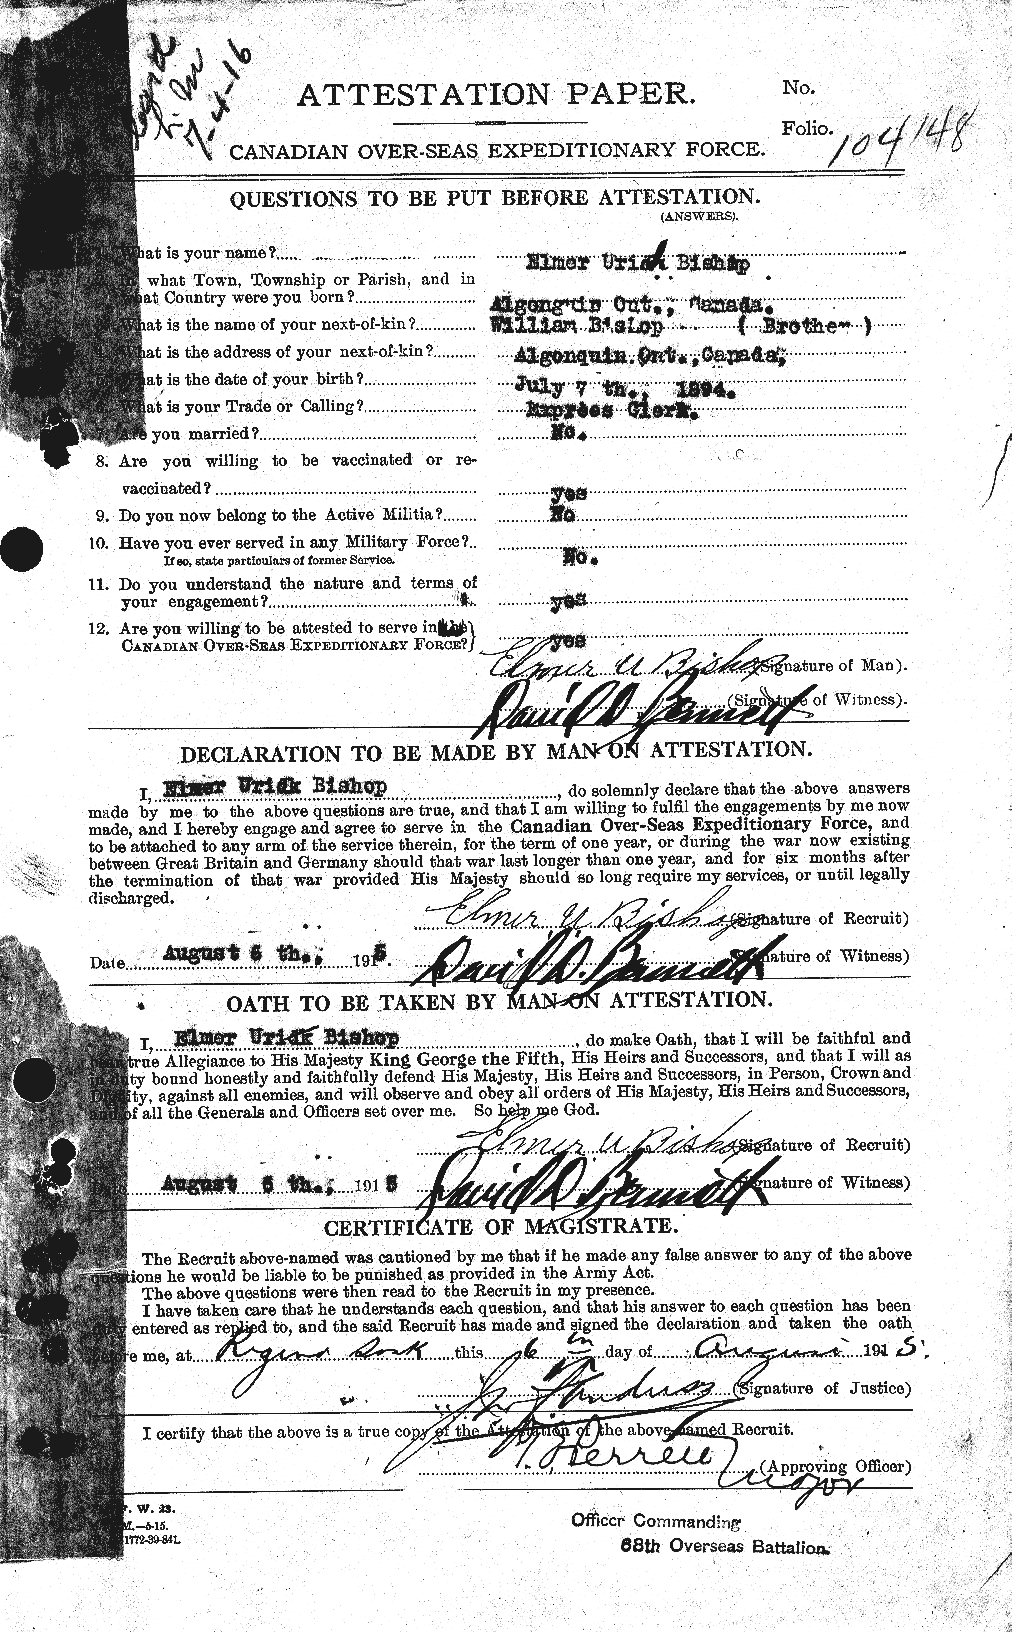 Personnel Records of the First World War - CEF 244233a